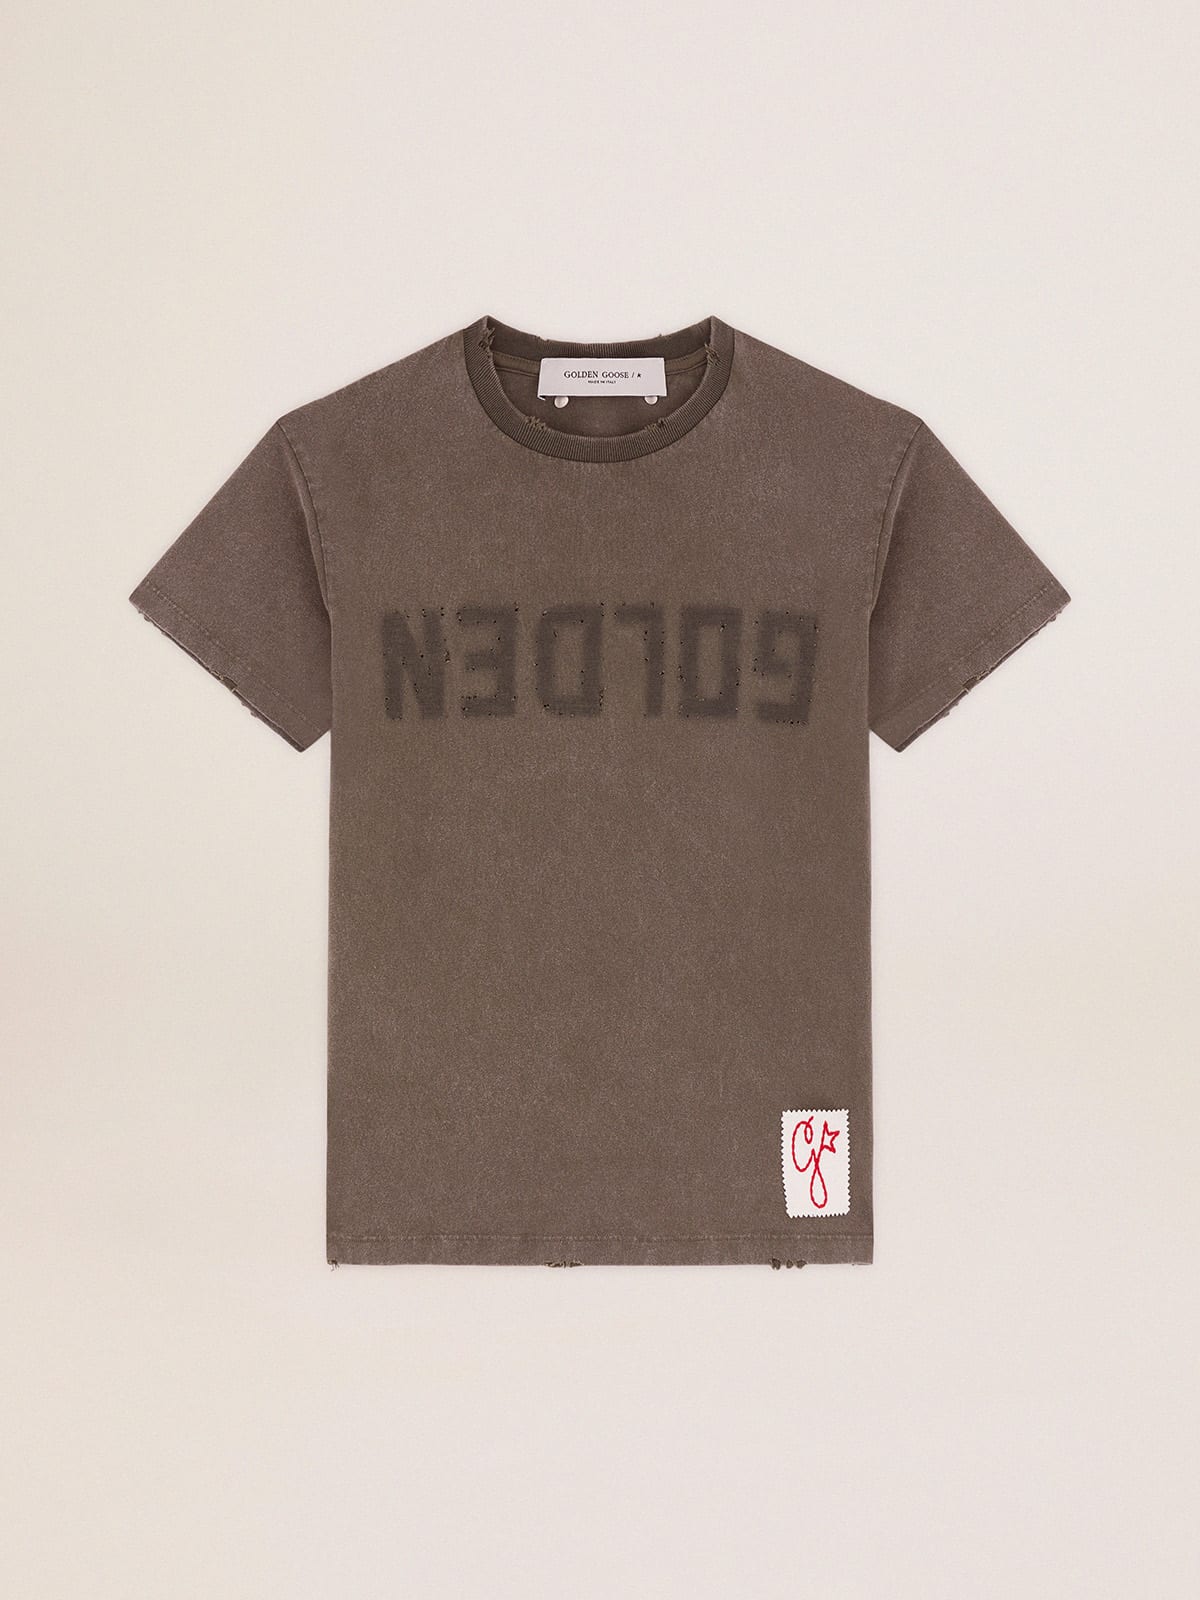 Olive-green slim-fit T-shirt with Golden lettering on the front